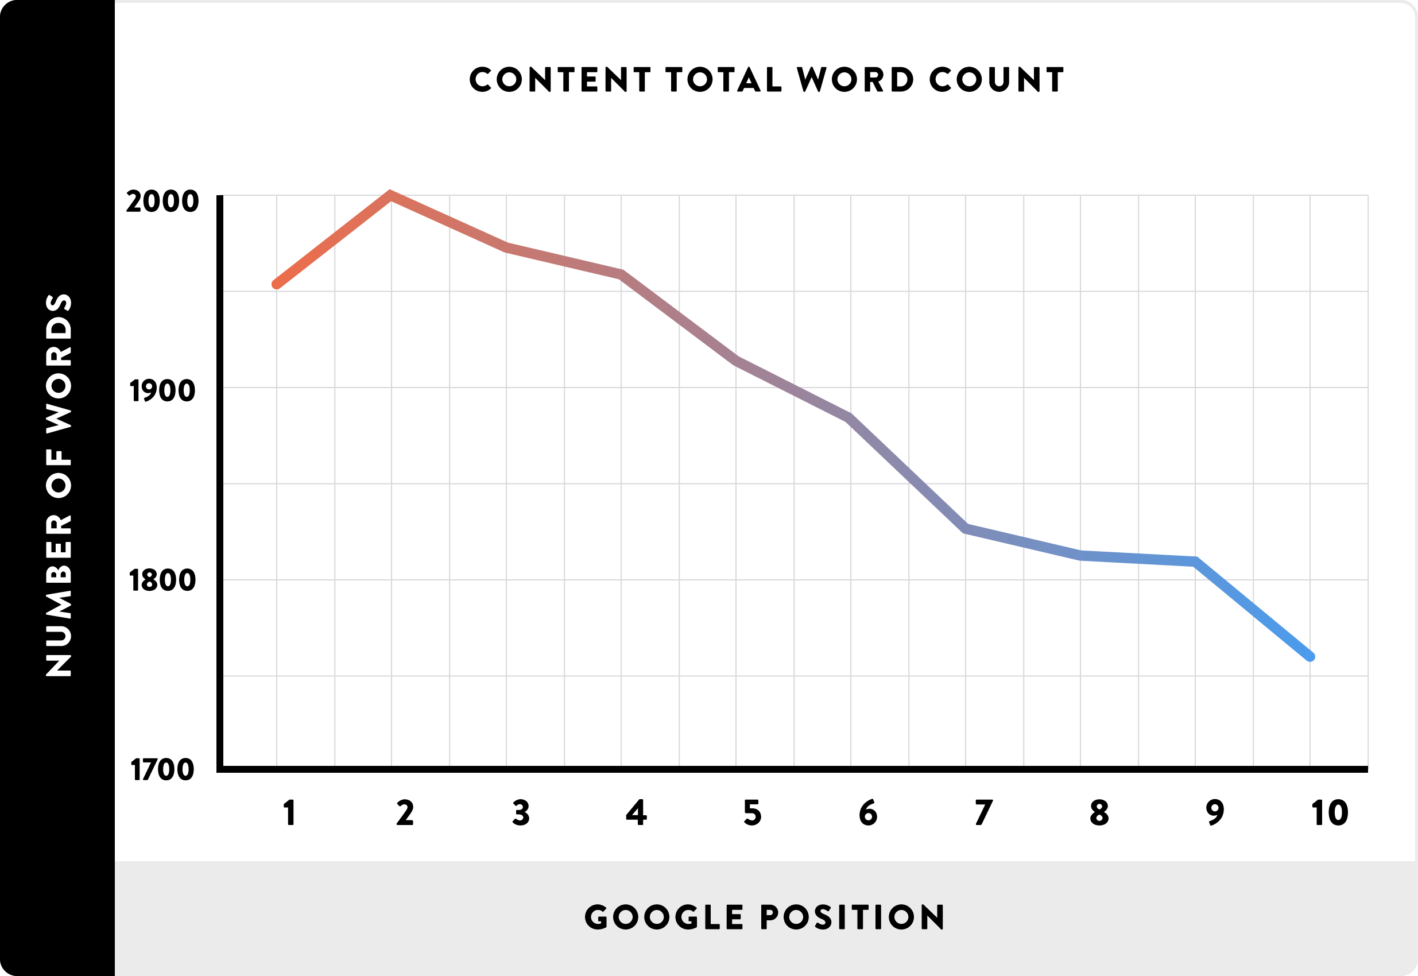 Backlinko study on the correlation between length of content and Google rankings